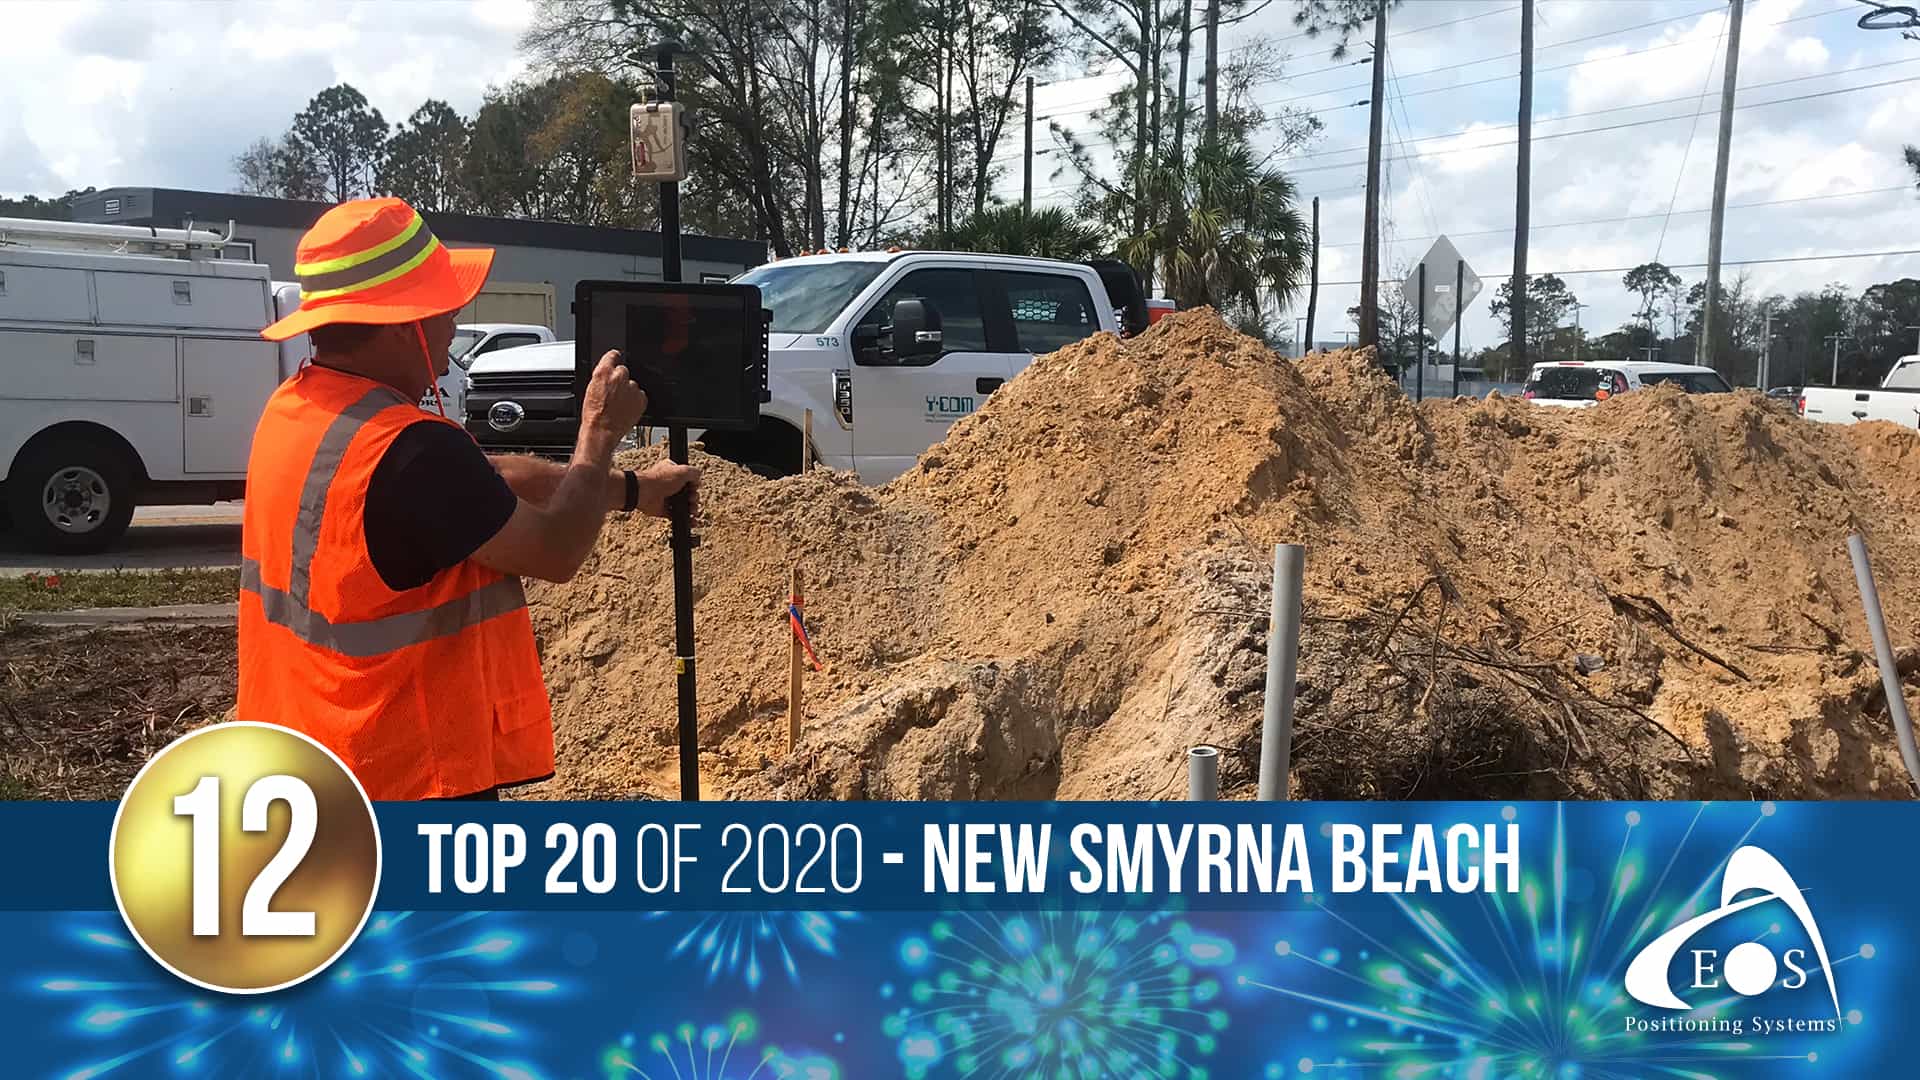 Eos Positioning Systems blog top articles of 2020: 12 - New Smyrna Beach